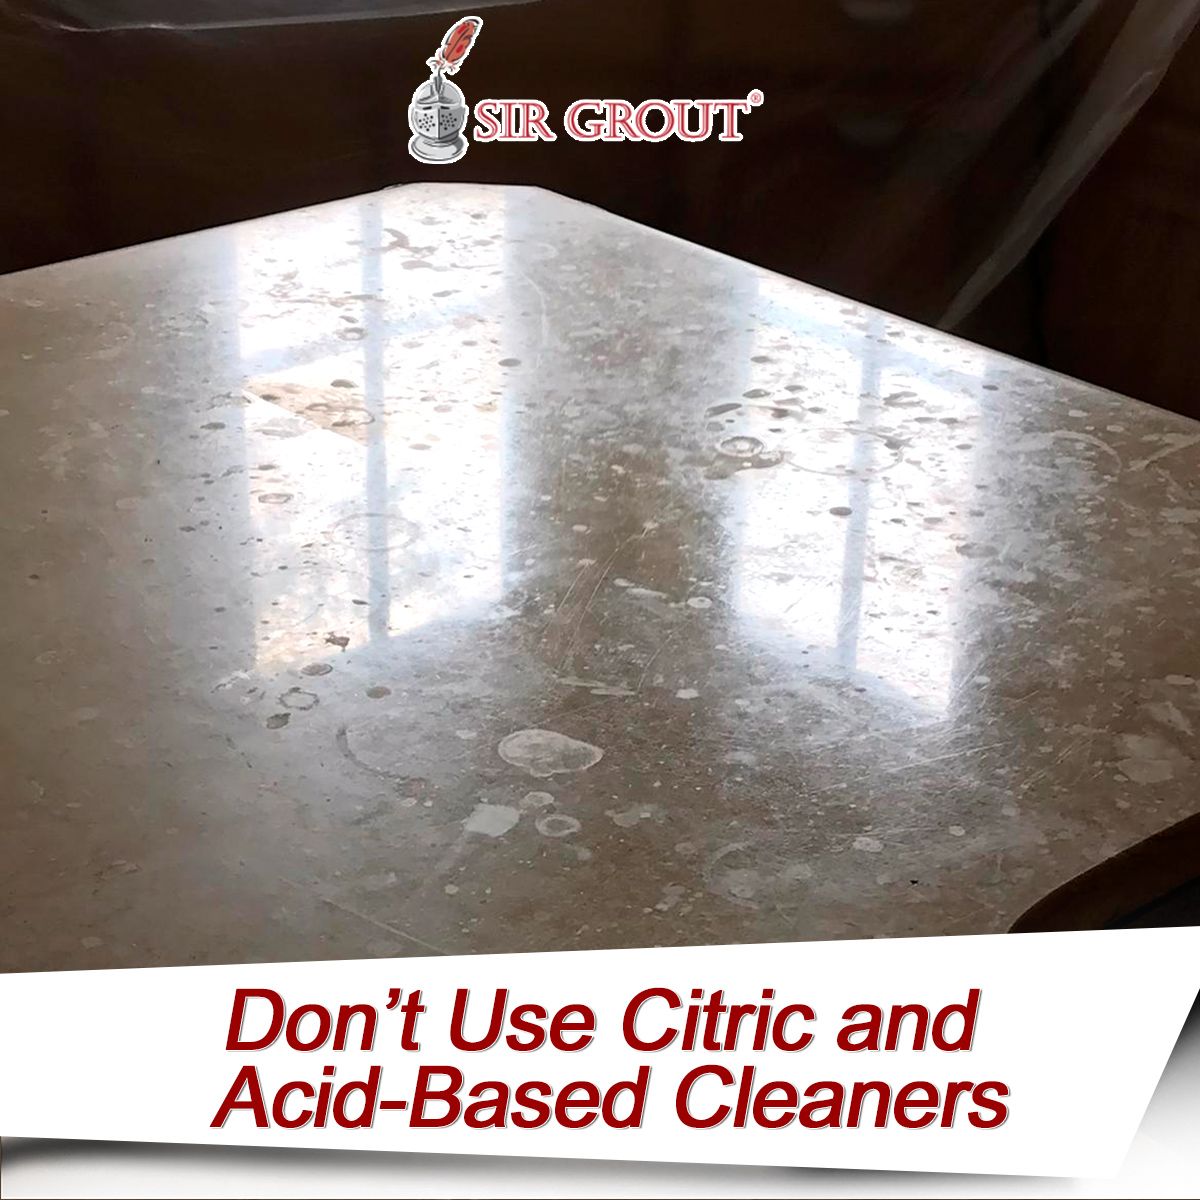 Do Not Use Citric and Acid-Based Cleaners